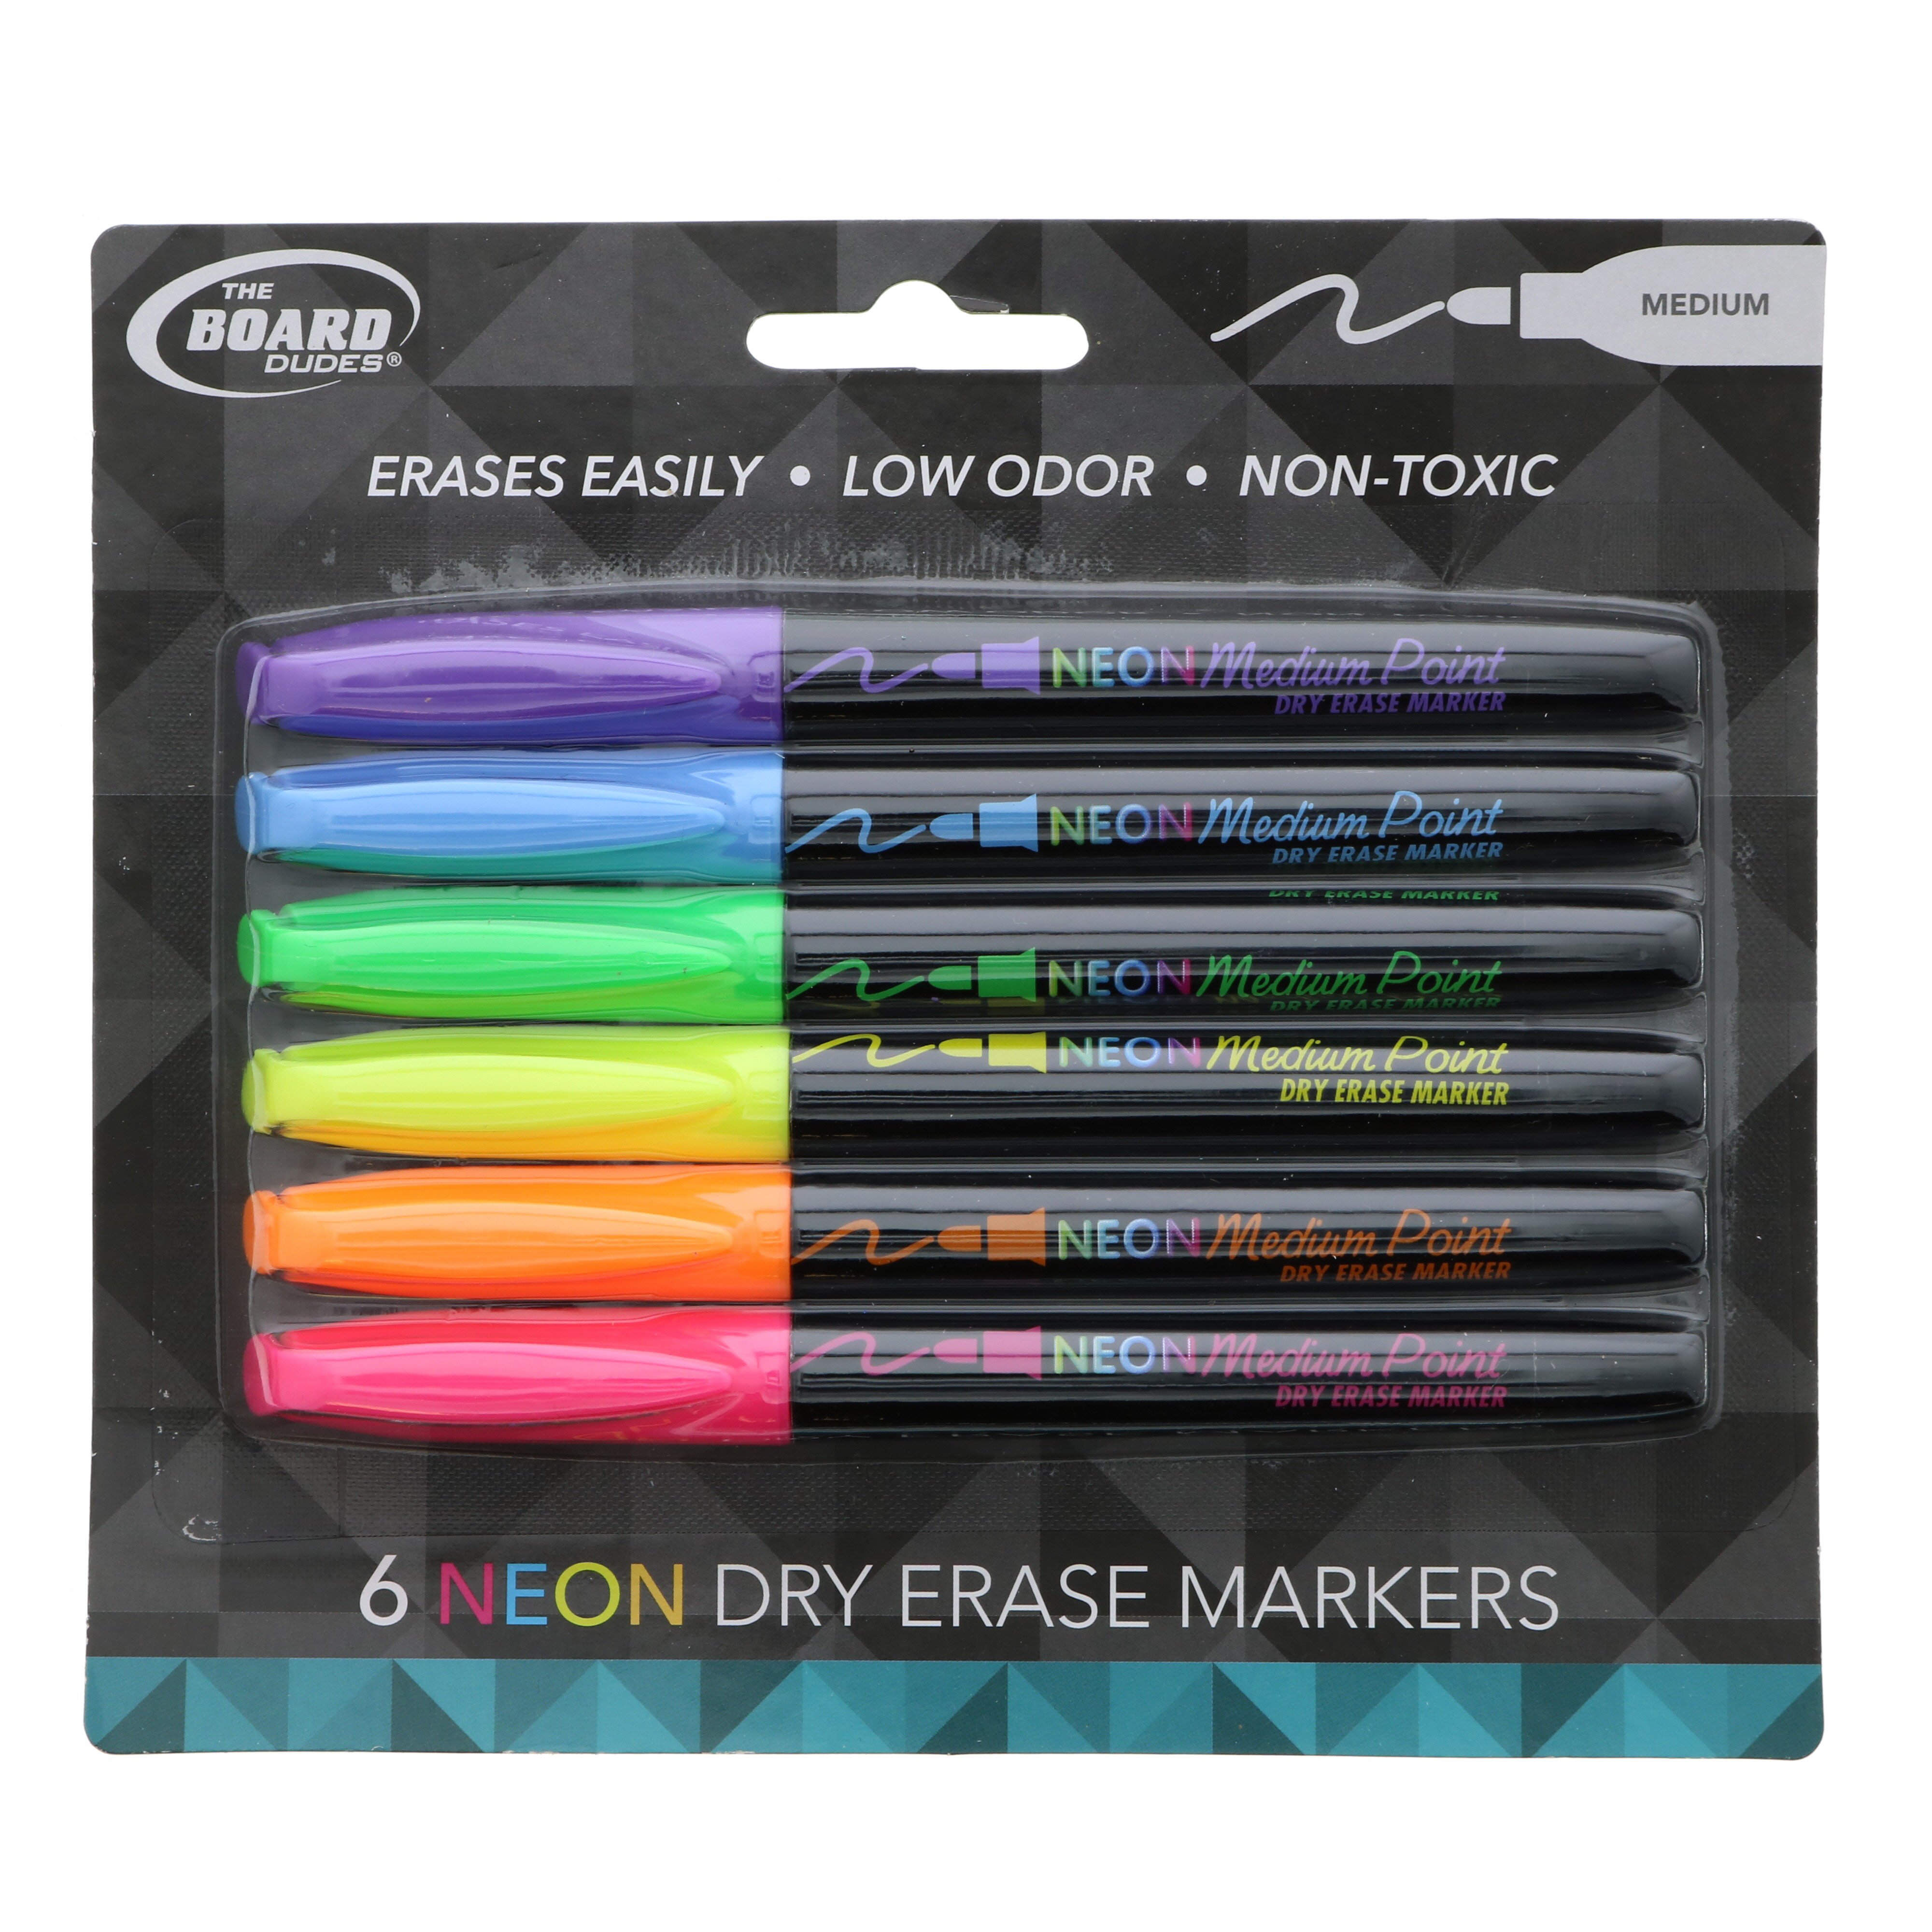 BRIGHTEN YOUR IDEAS WITH THE BOARD DUDES CYJ58 NEON DRY ERASE MARKERS! 